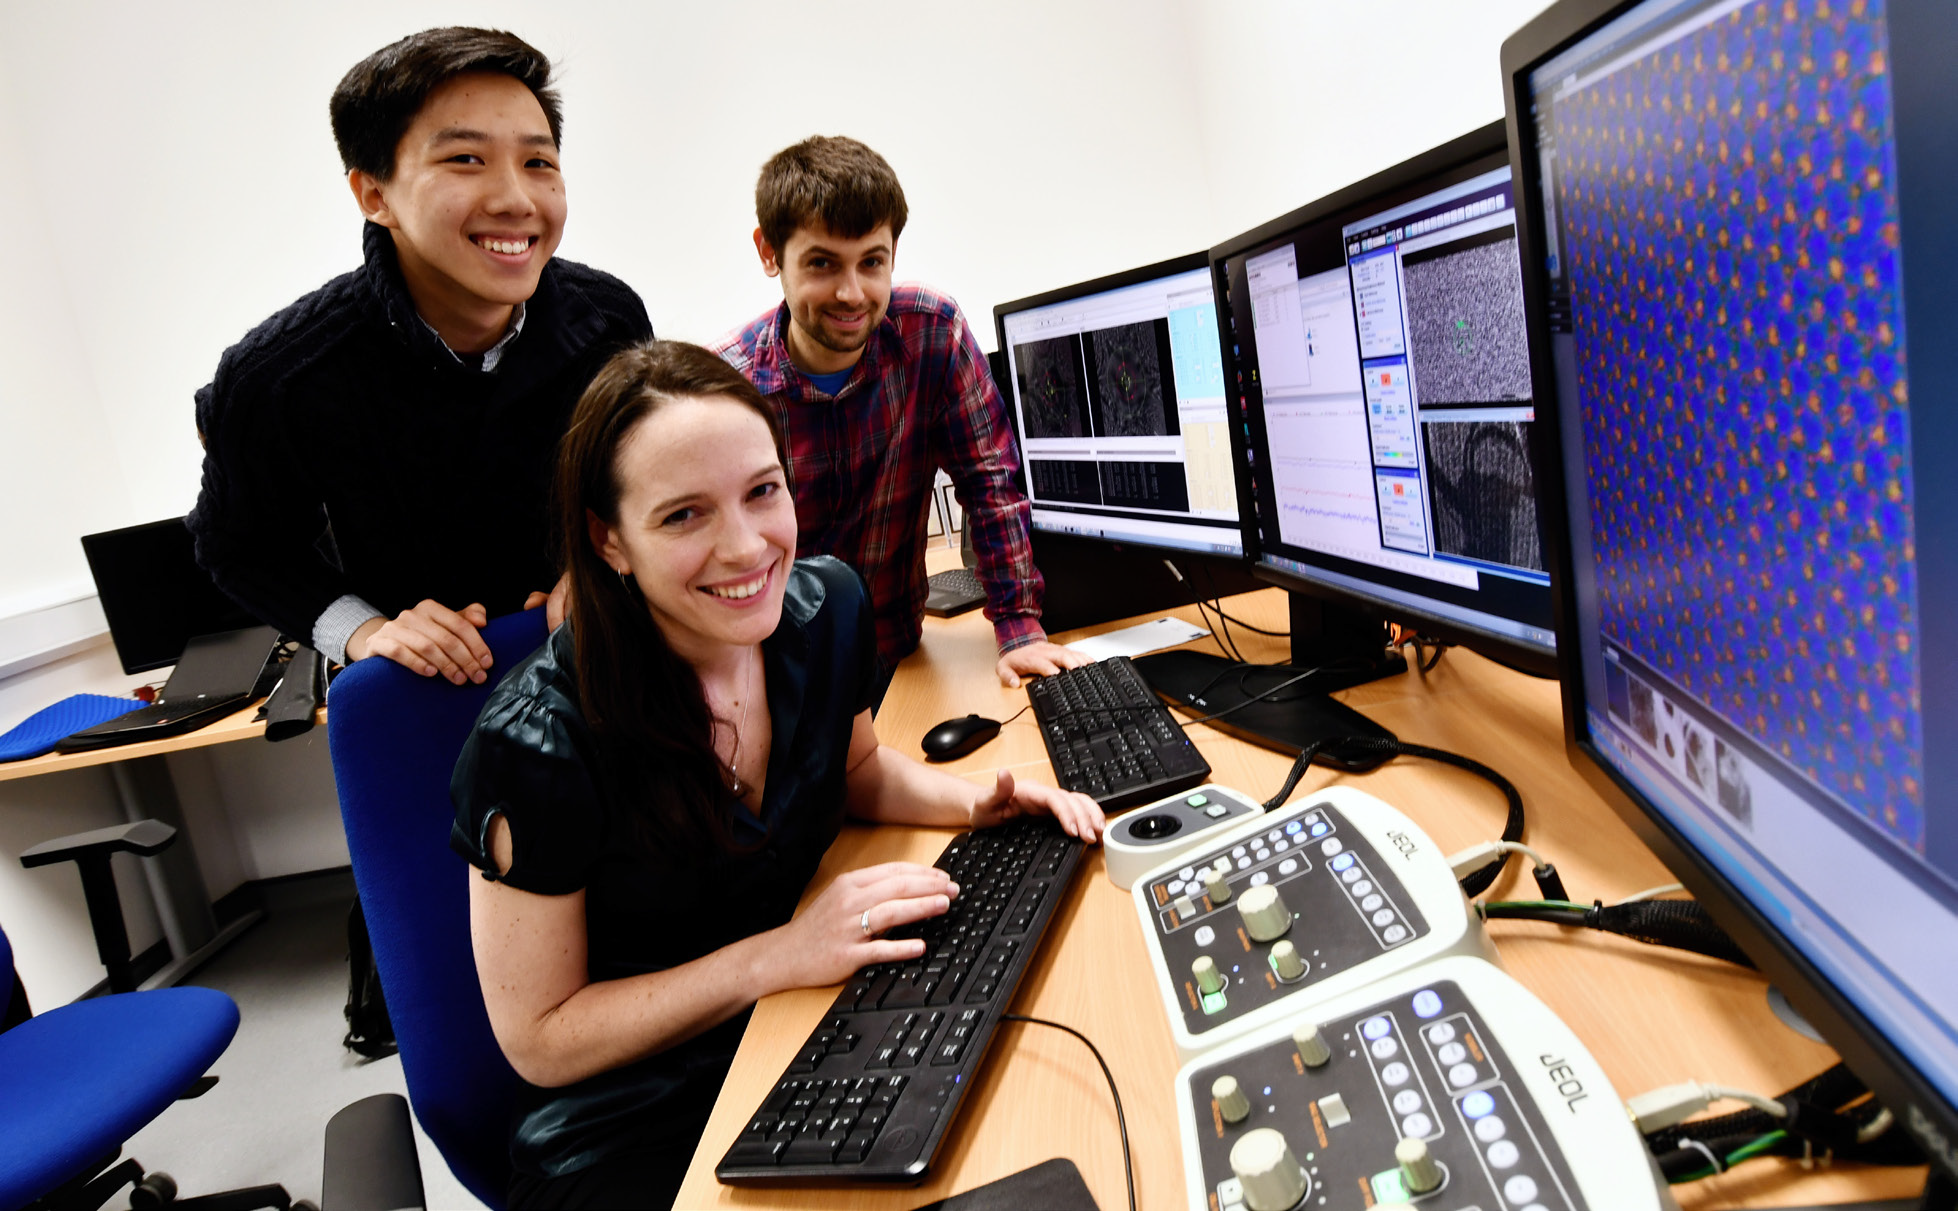 Researchers from the National Graphene Institute at the University of Manchester were the first users of ePSIC. From left to right: Lan Nguyen, Sarah Haigh and Aidan Rooney.